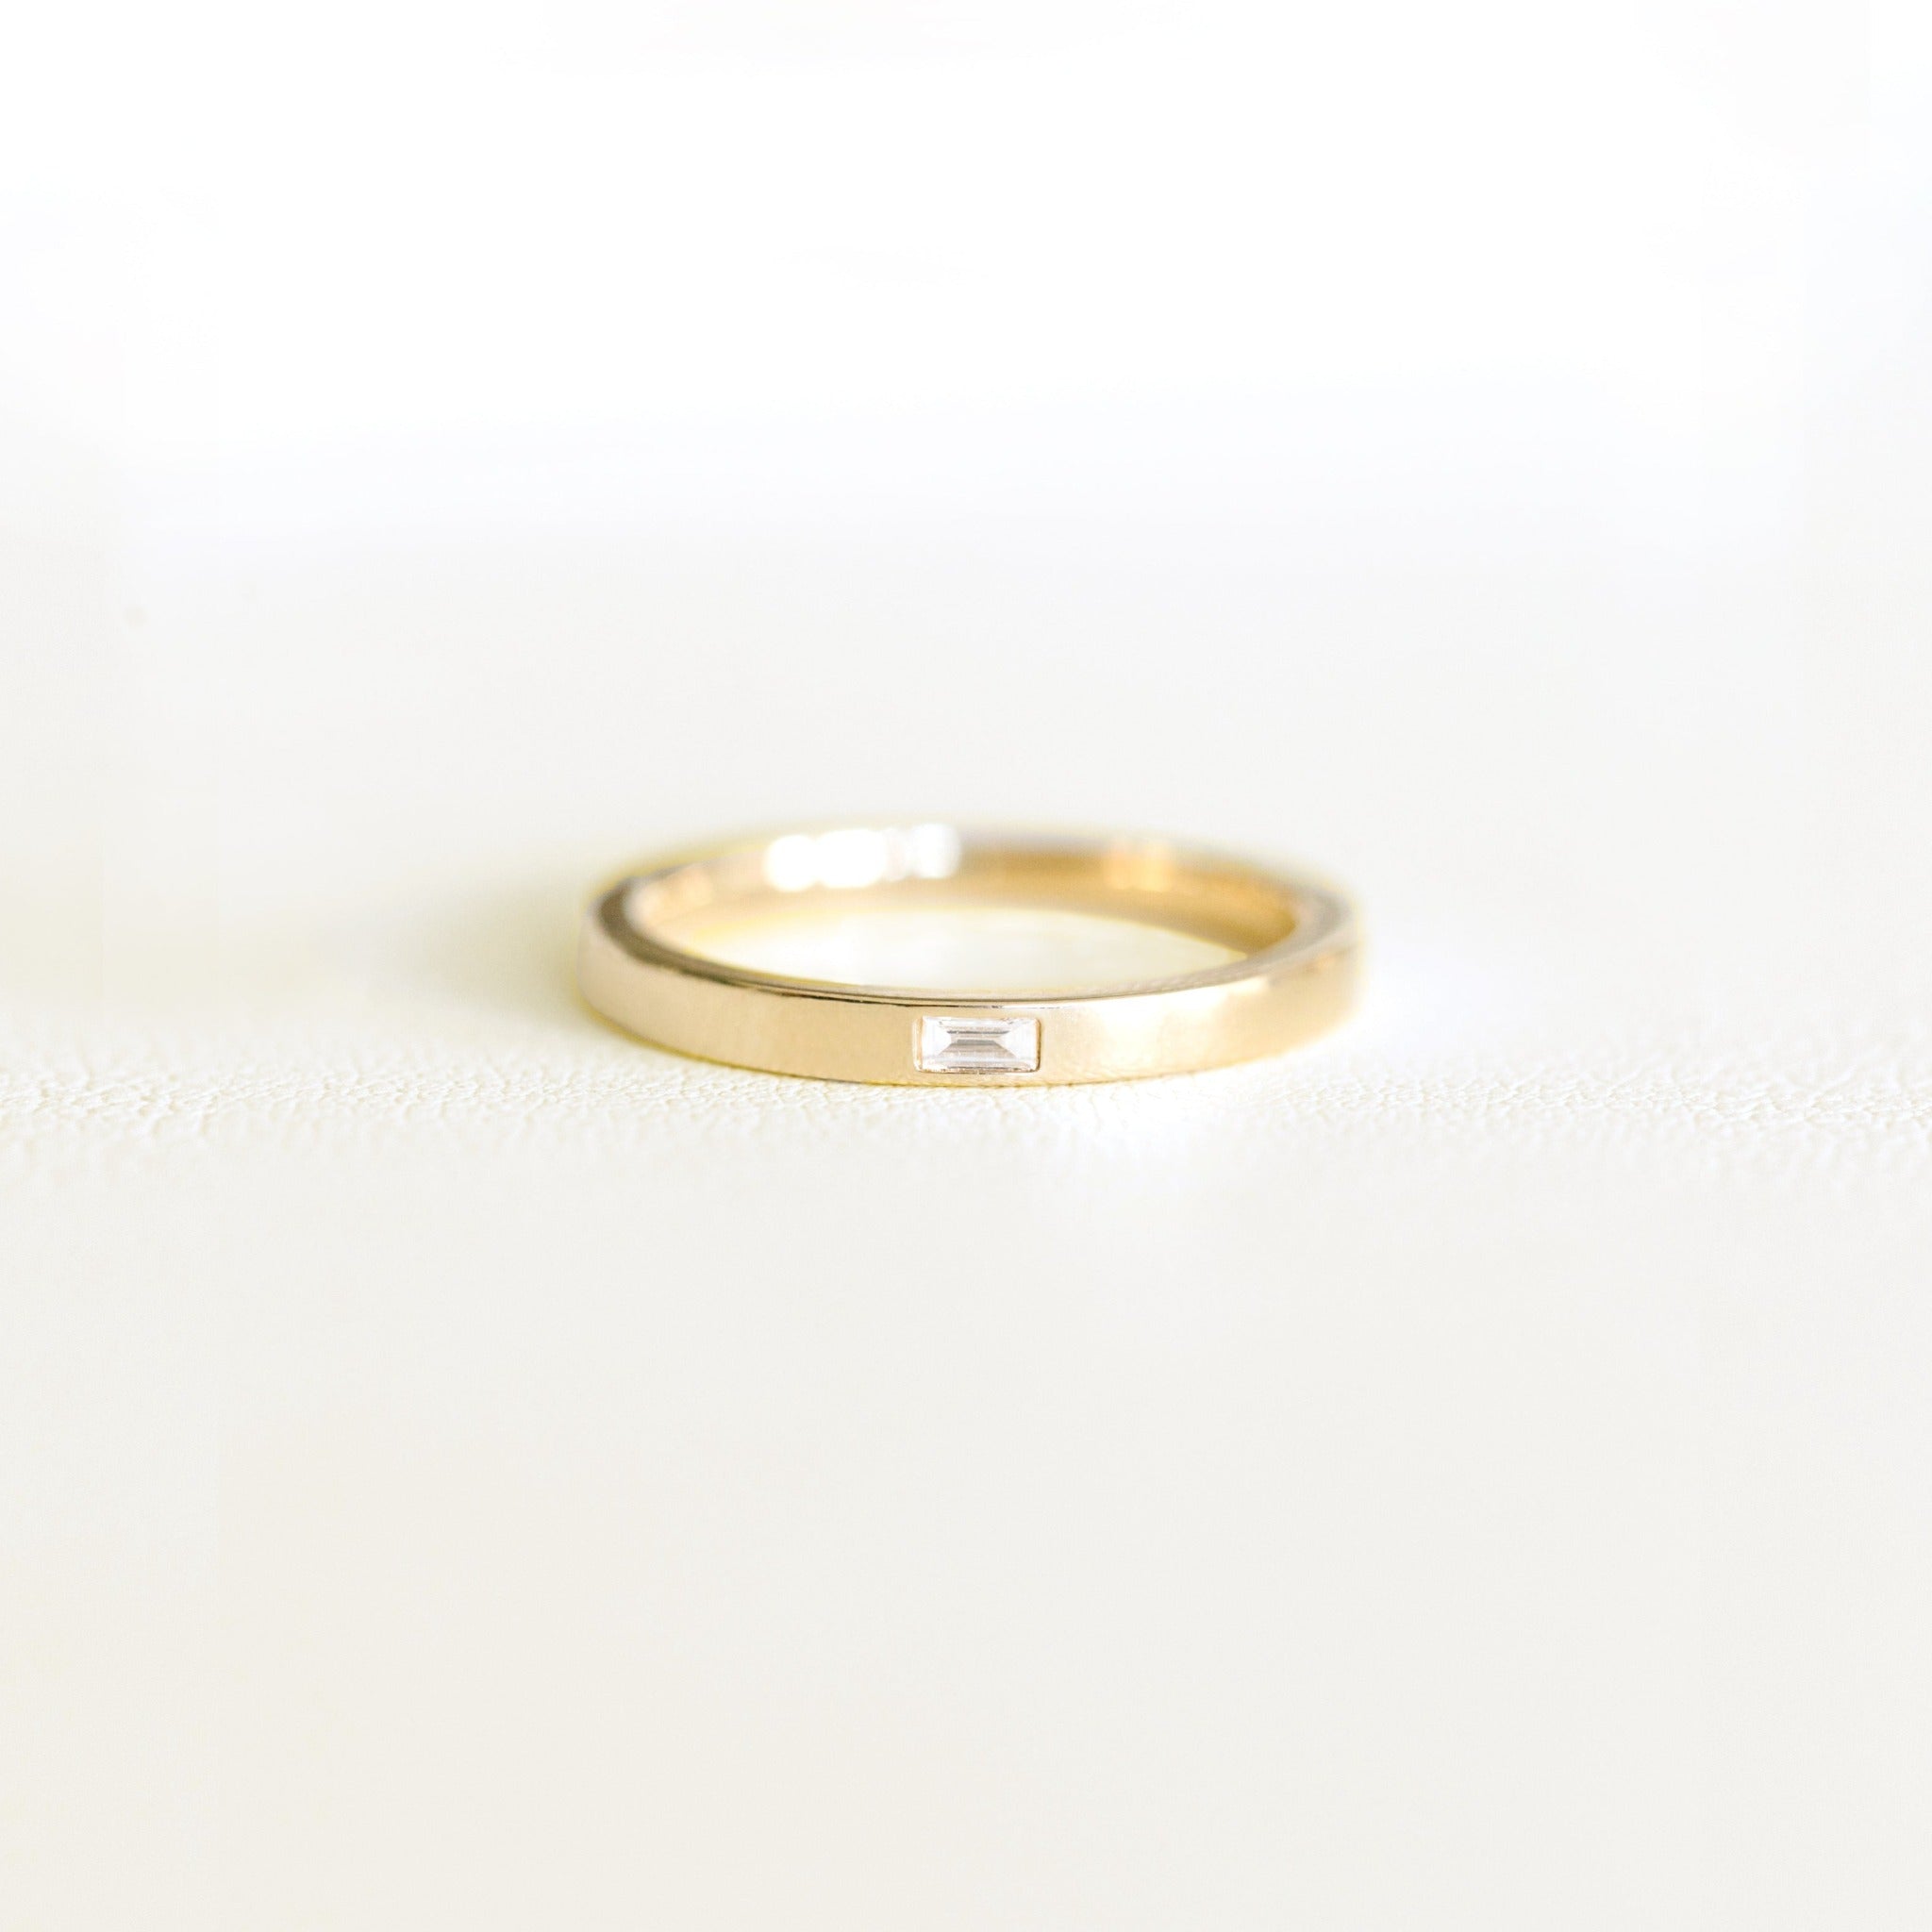 Recycled 14k yellow solid gold ring with a baguette diamond. The band is wide, is stackable and comfortable. A modern simple gold ring design.